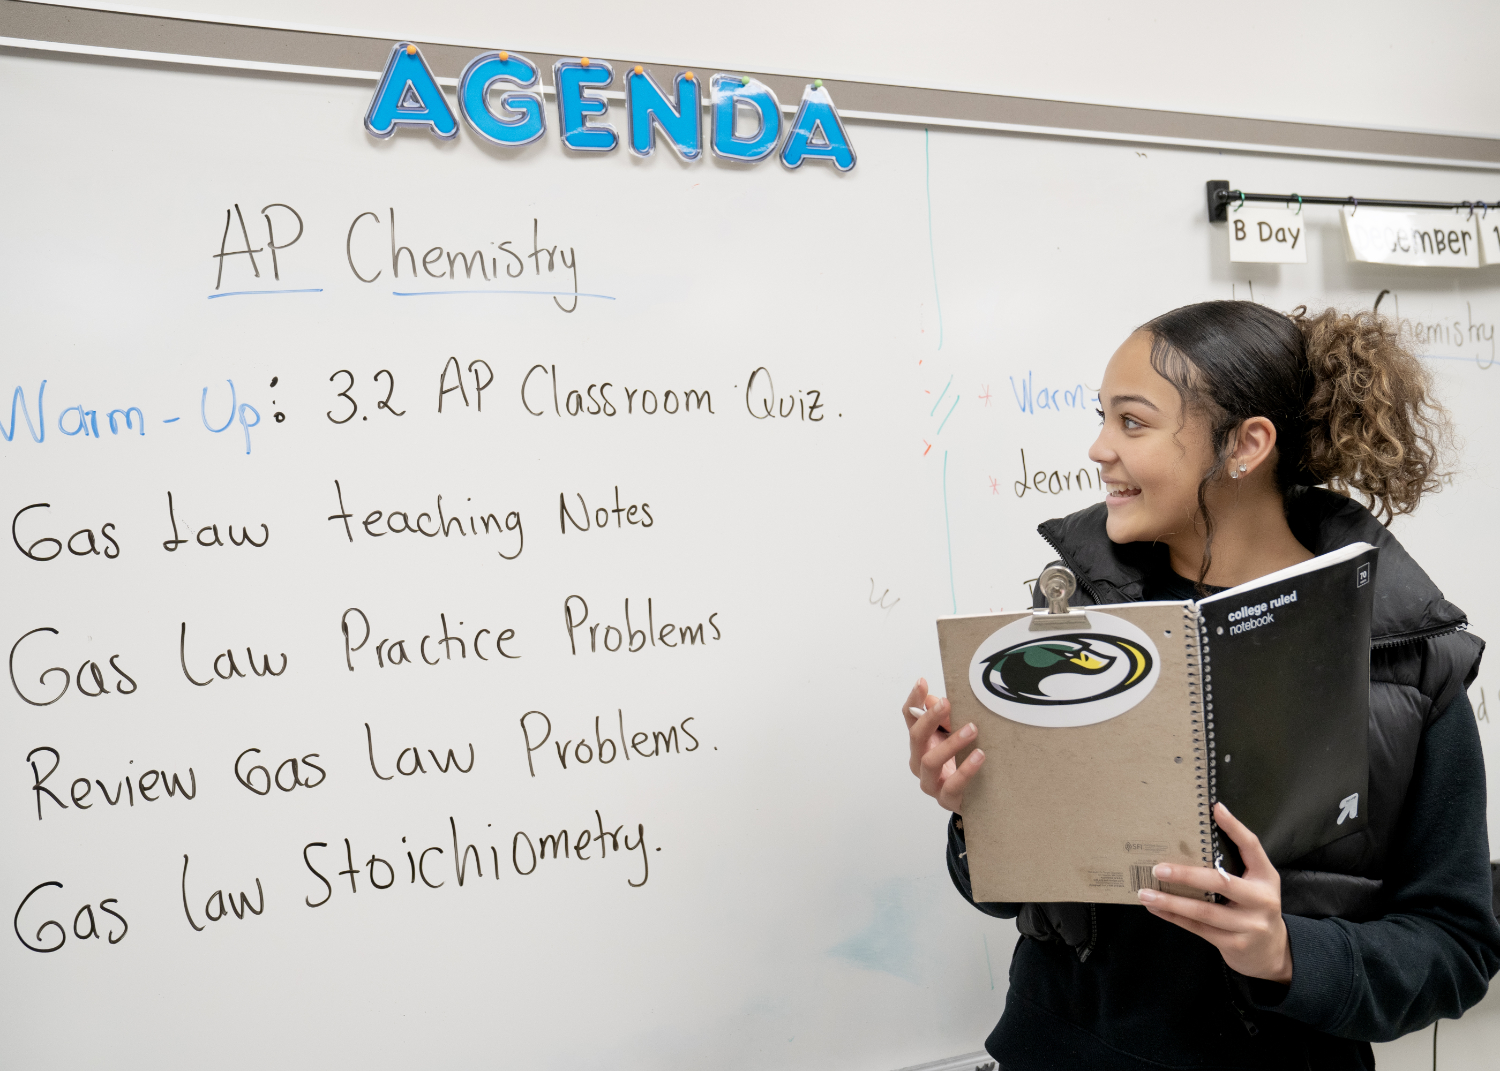 Student at whiteboard showing AP Chemistry agenda